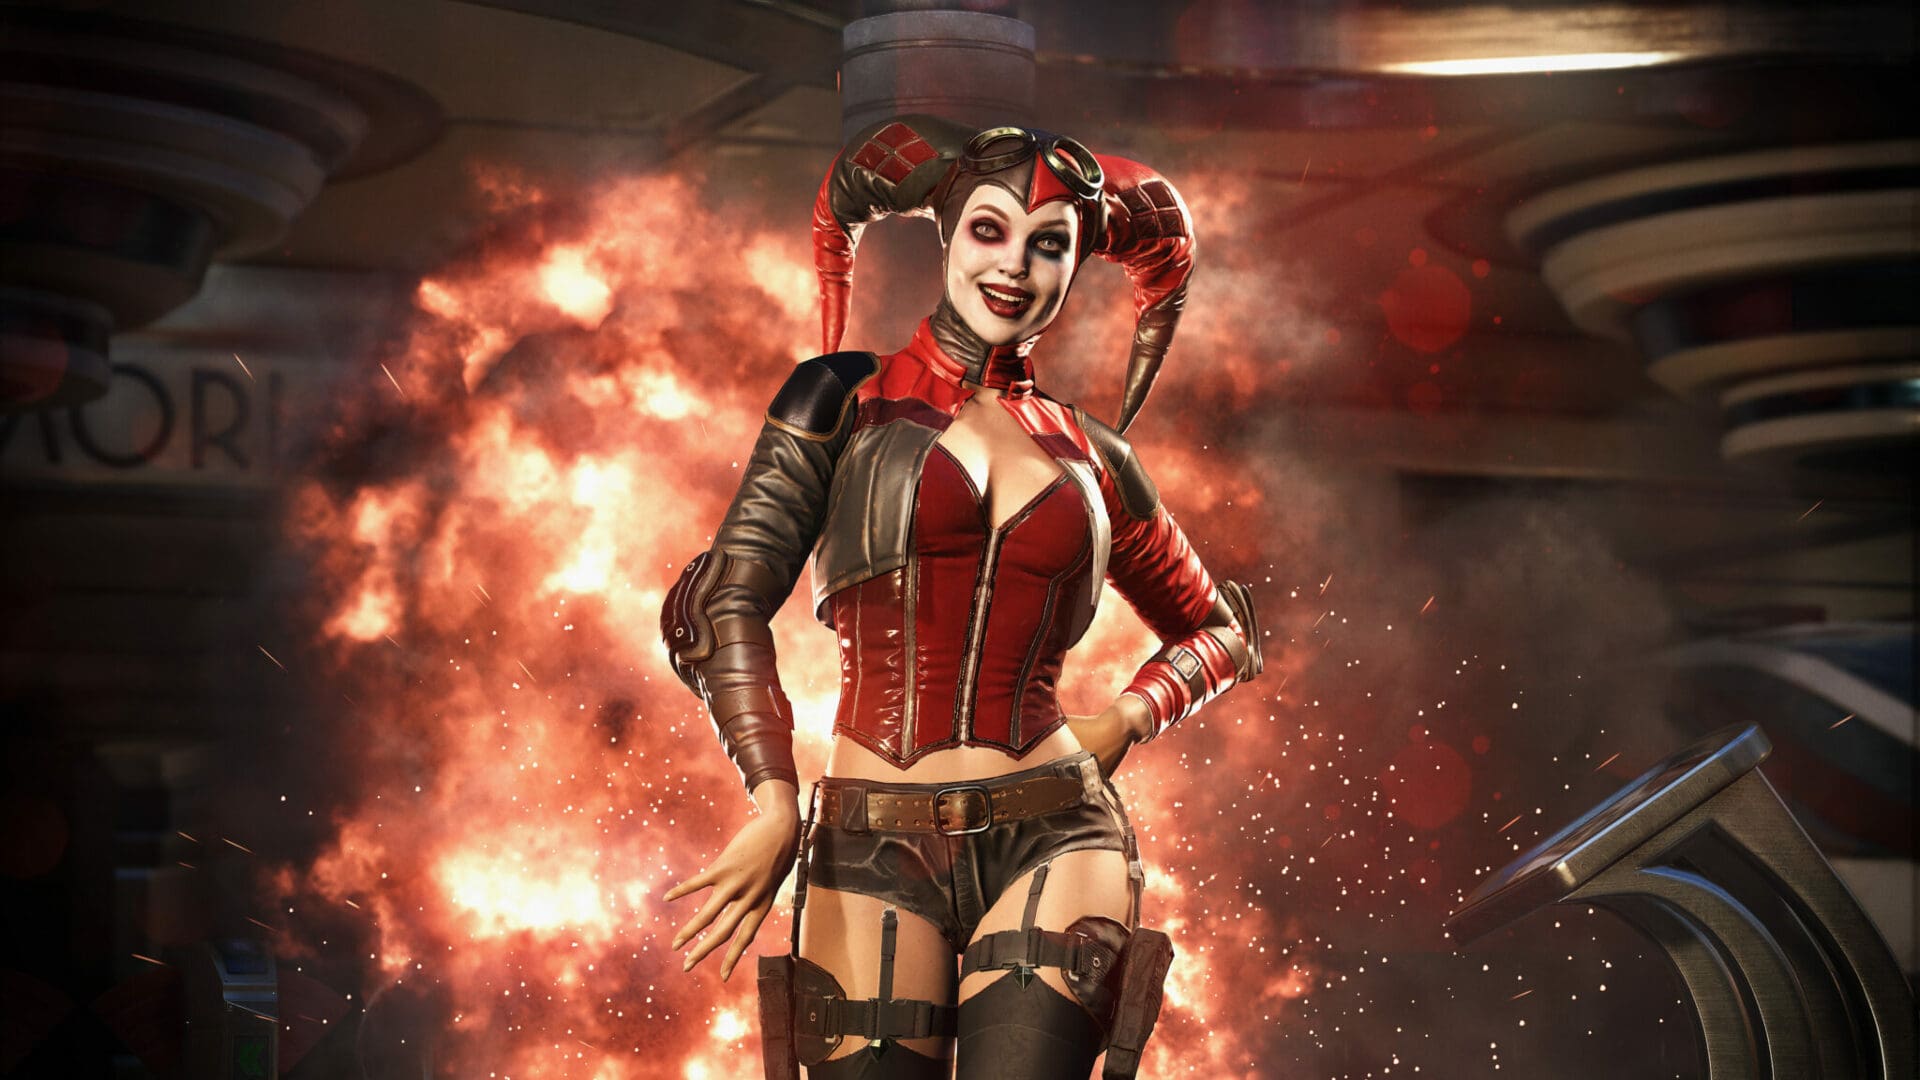 Injustice 2 Trailer Reveals Suicide Squad Members Harley Quinn and Deadshot